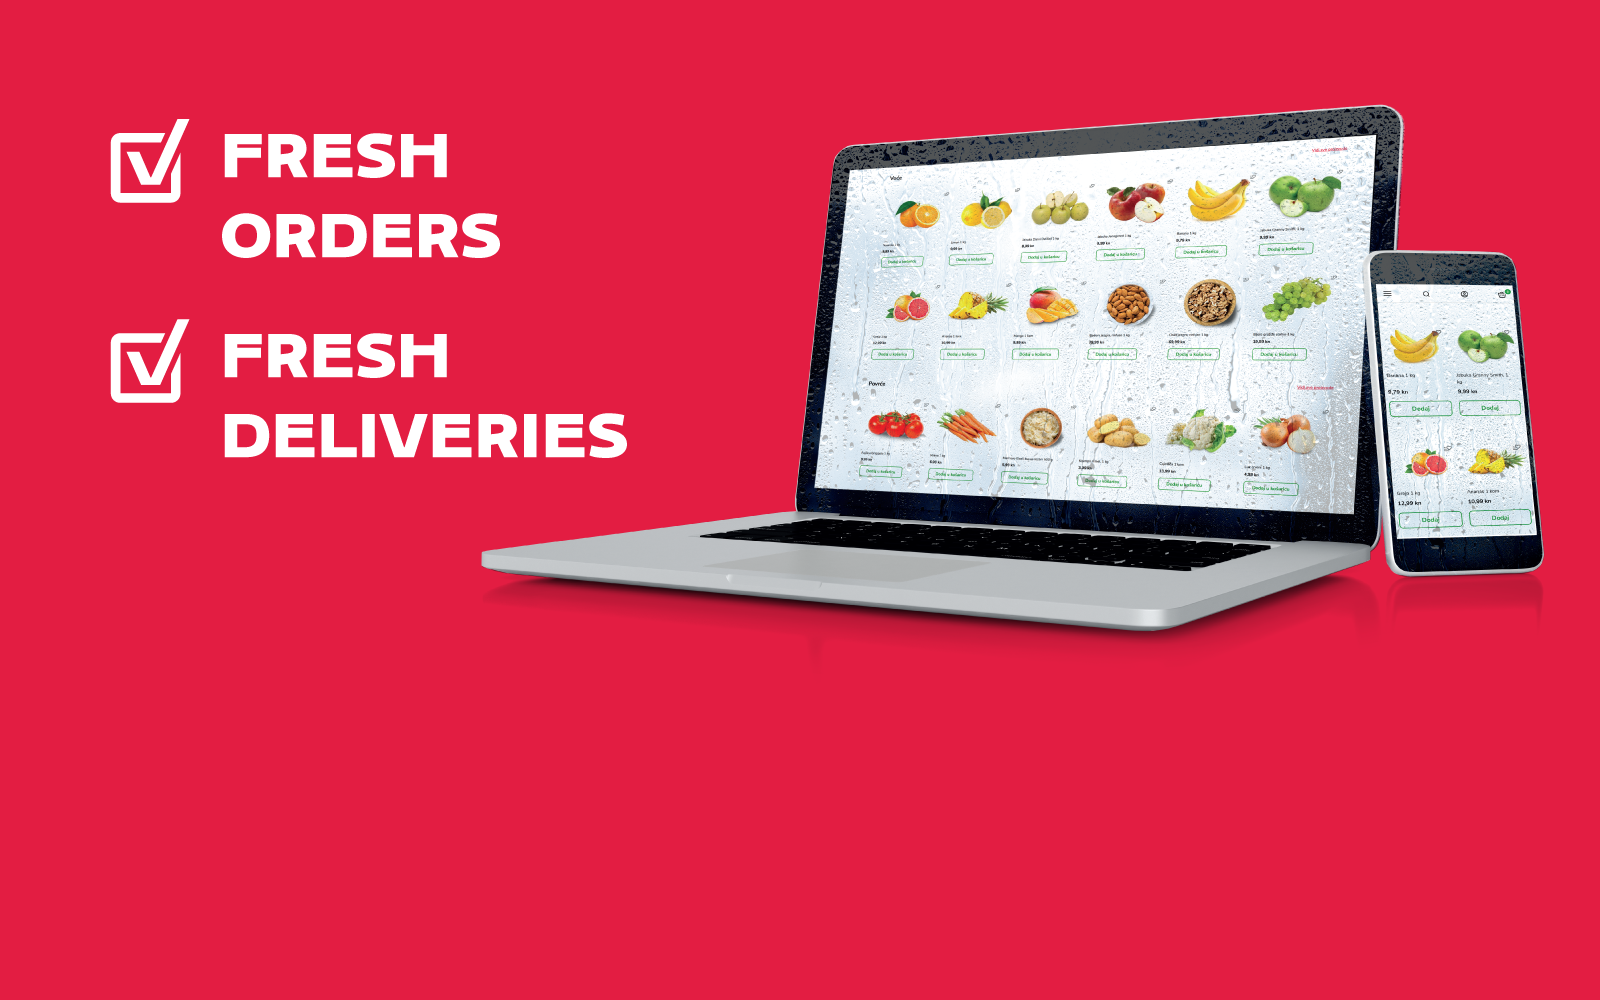 Tommy banner - Order groceries by phone and have them delivered straight to your doorstep!